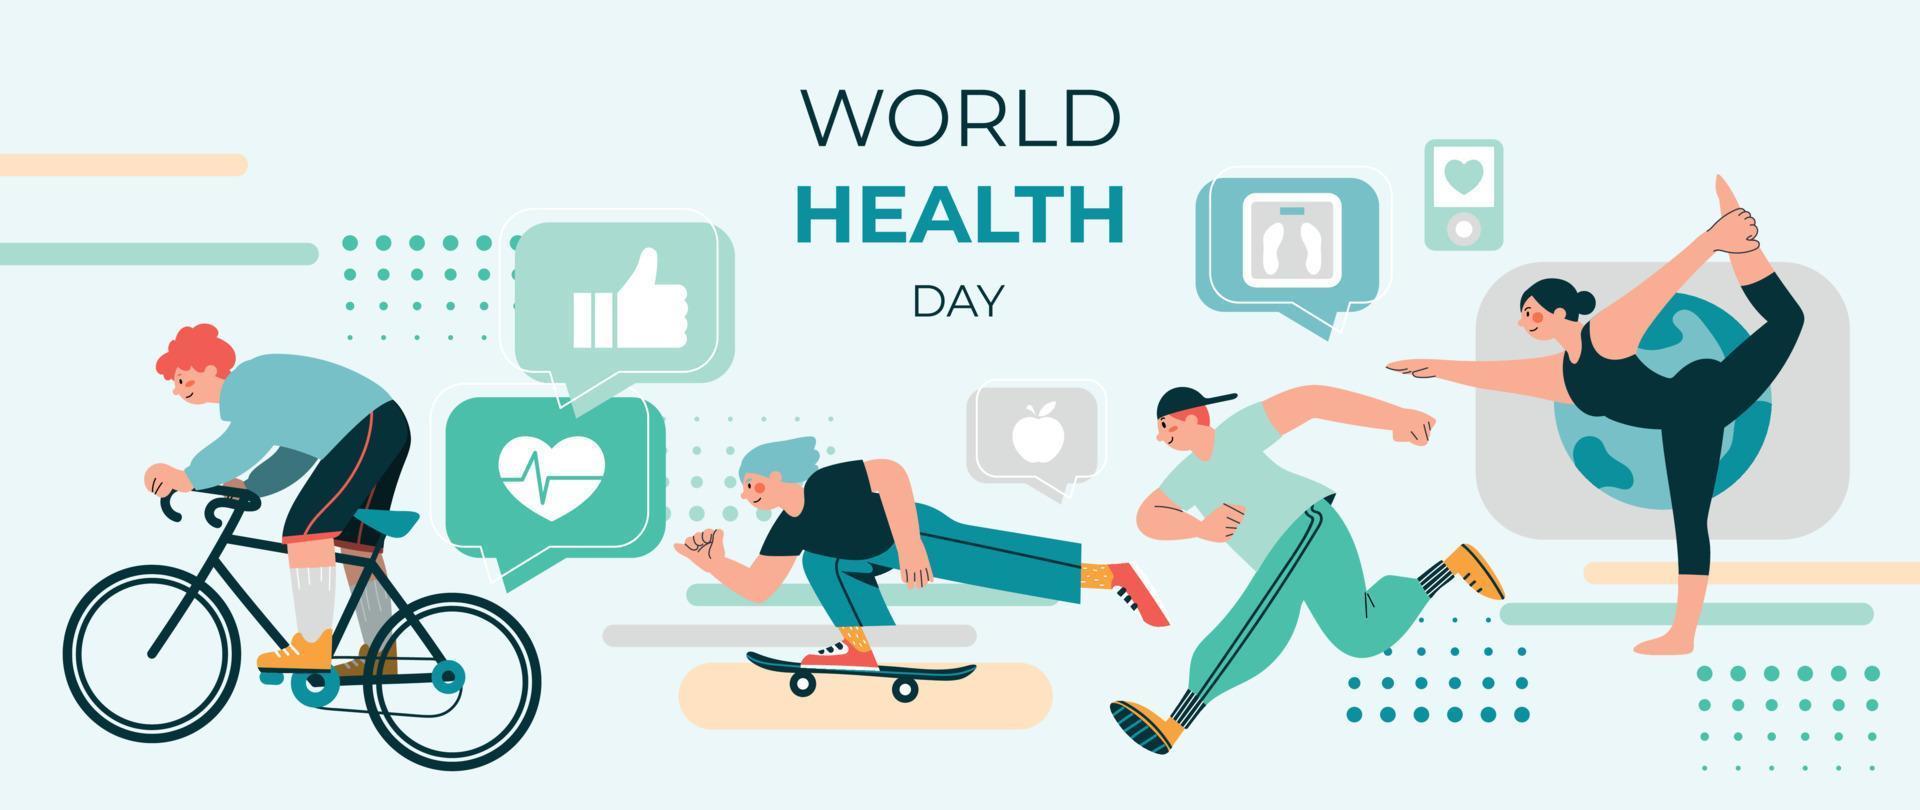 World health day concept, 7 April, background vector. Hand drawn doodle style of people working out, yoga exercise, skateboard, text chat elements. Design for web, banner, campaign, social media post. vector